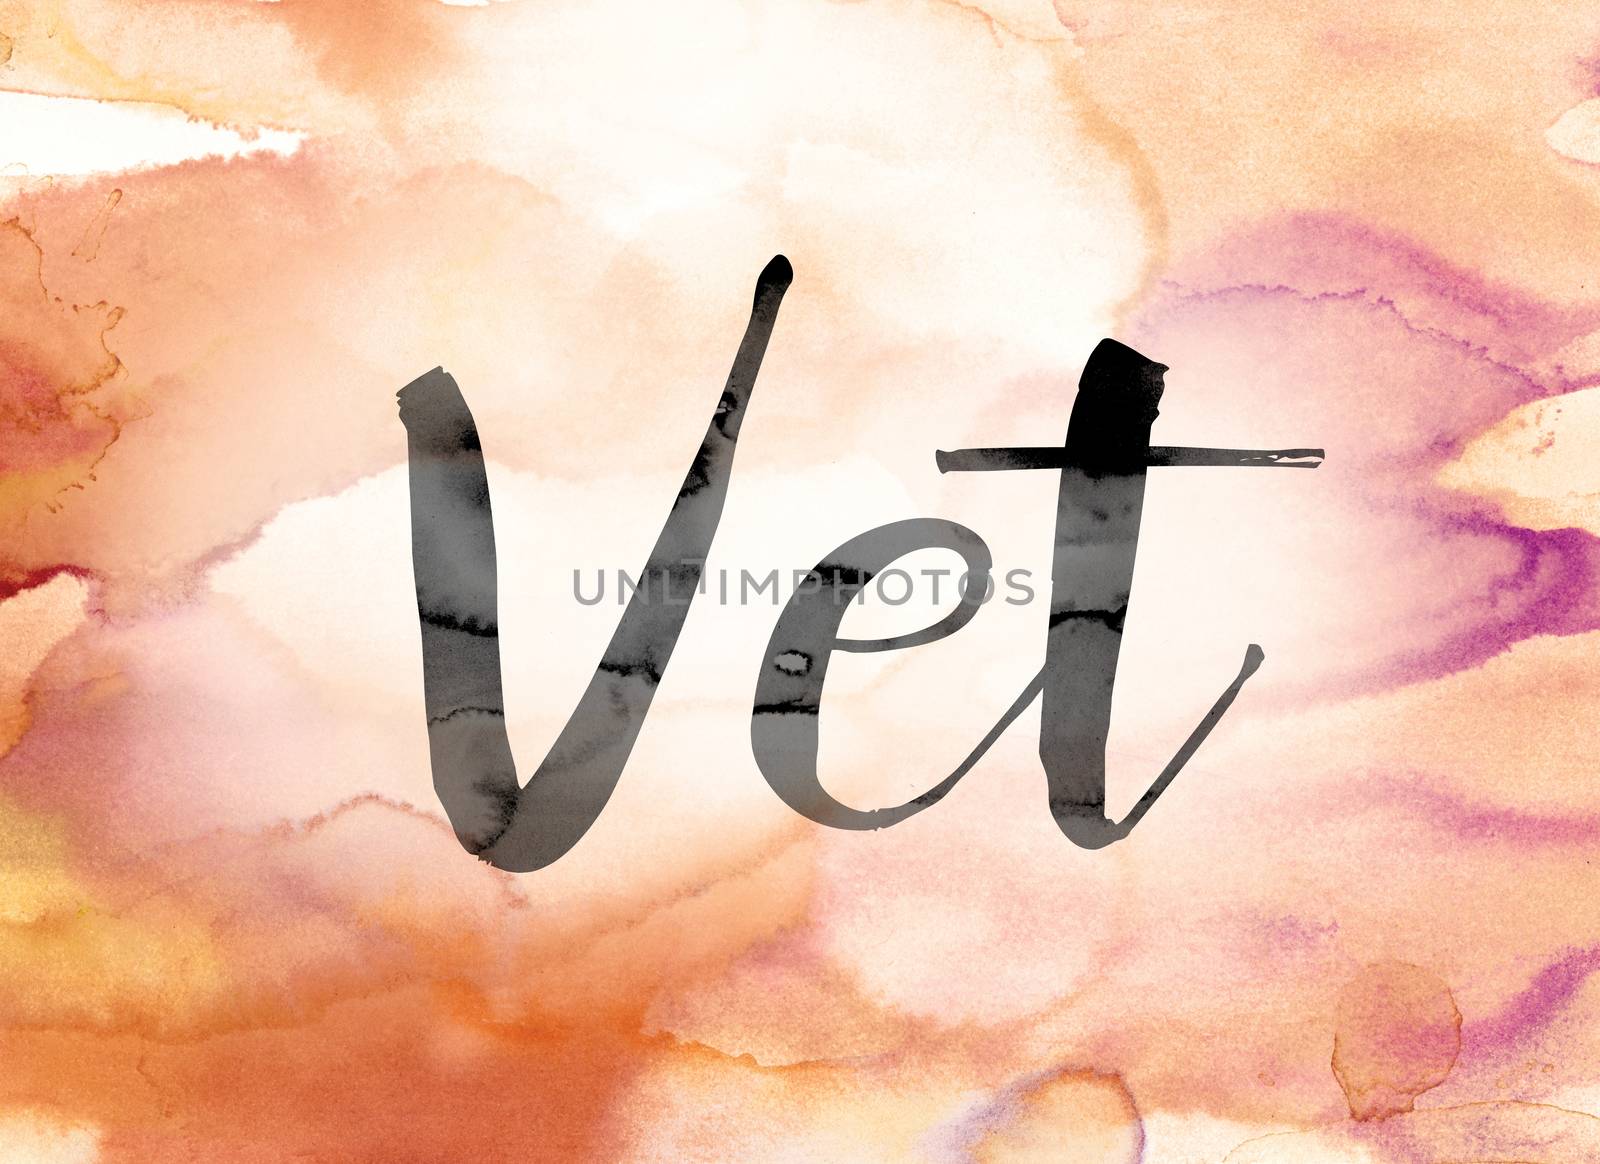 The word "Vet" painted in black ink over a colorful watercolor washed background concept and theme.